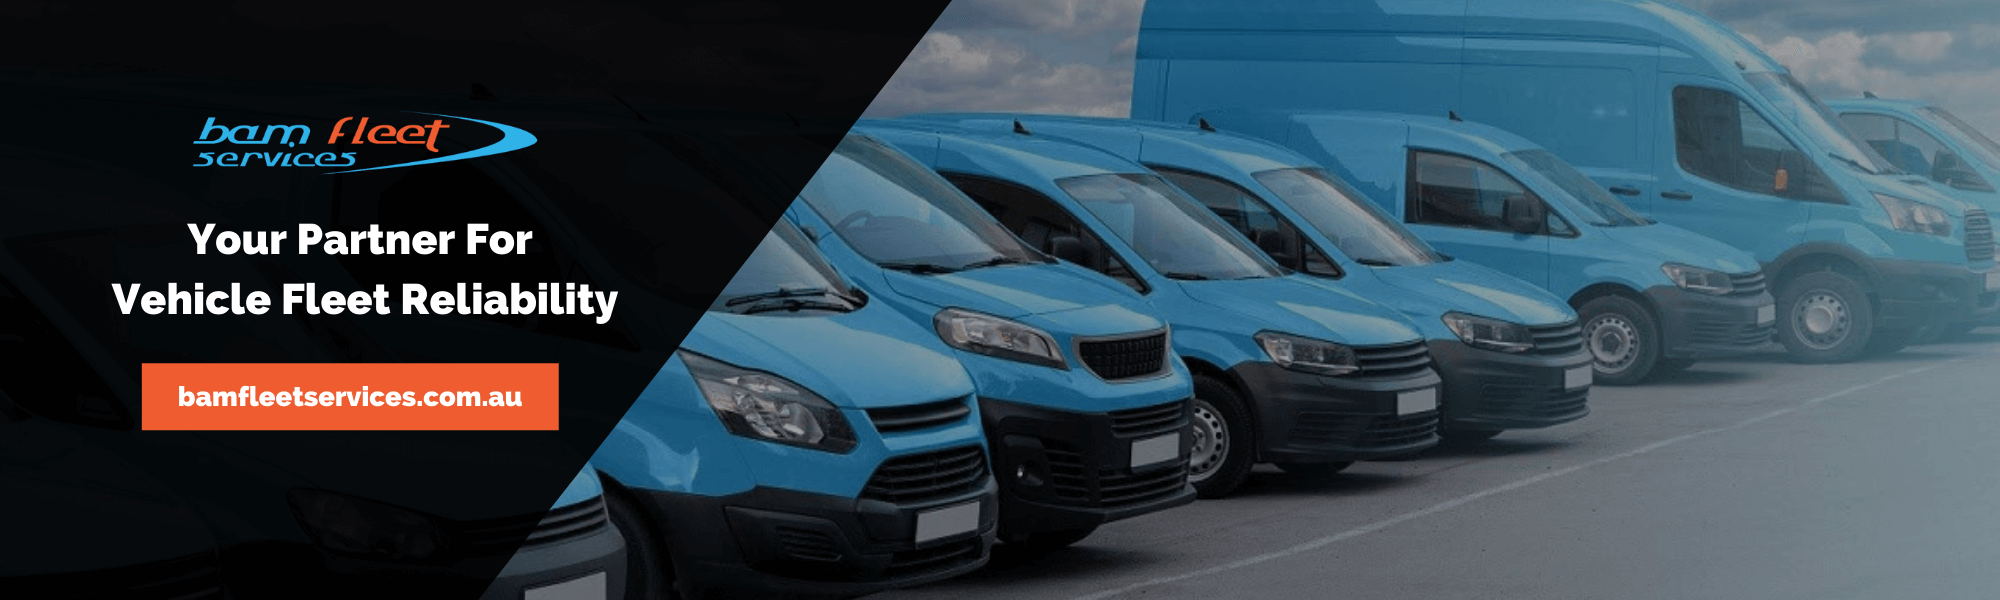 BAM Fleet Services - Your Partner For Vehicle Reliability (1)